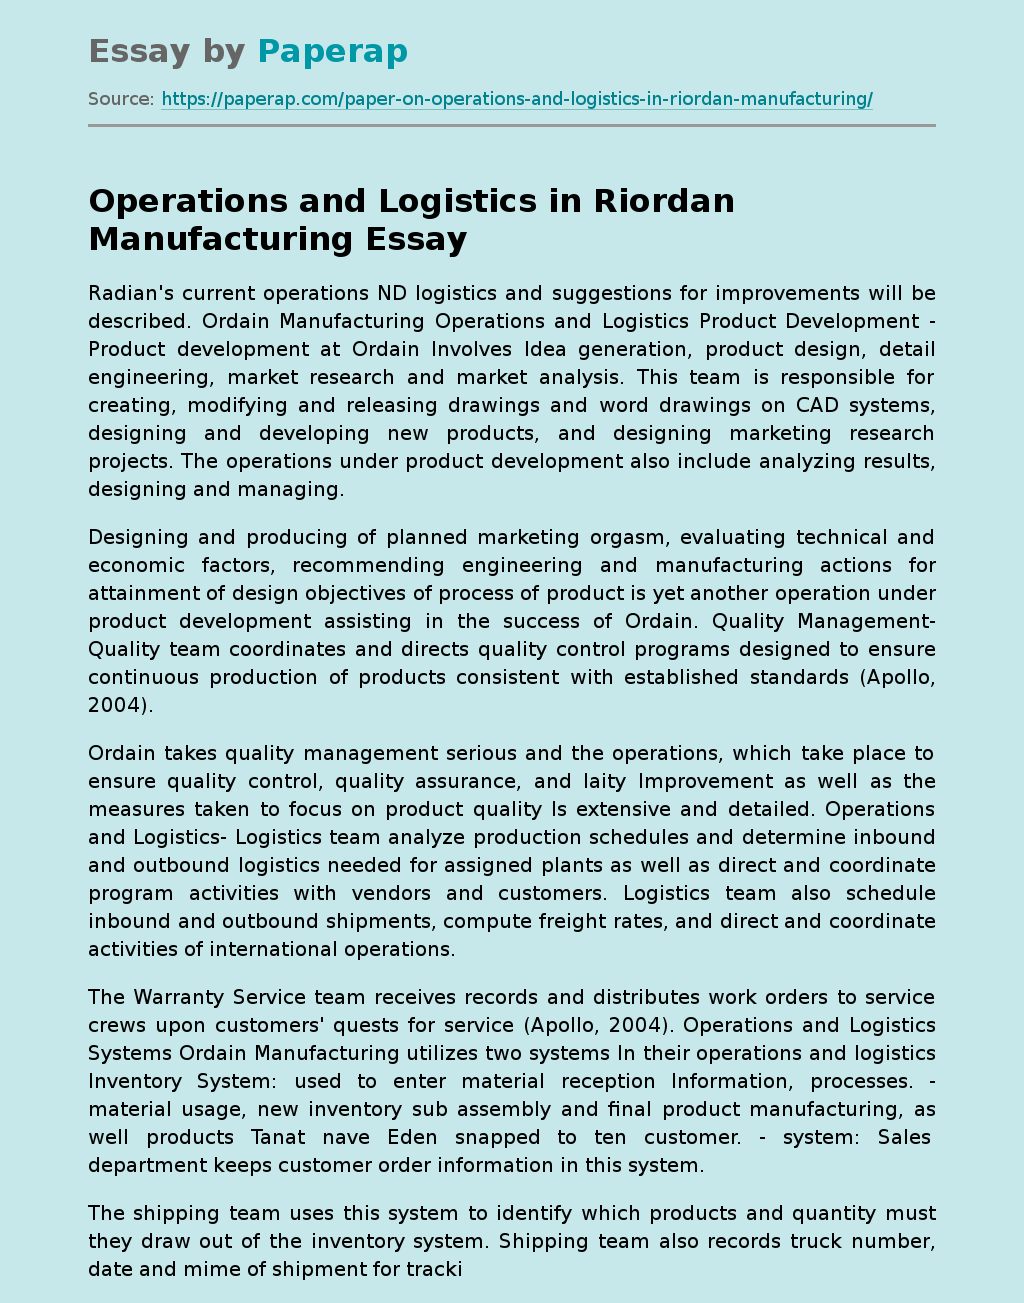 Operations and Logistics in Riordan Manufacturing